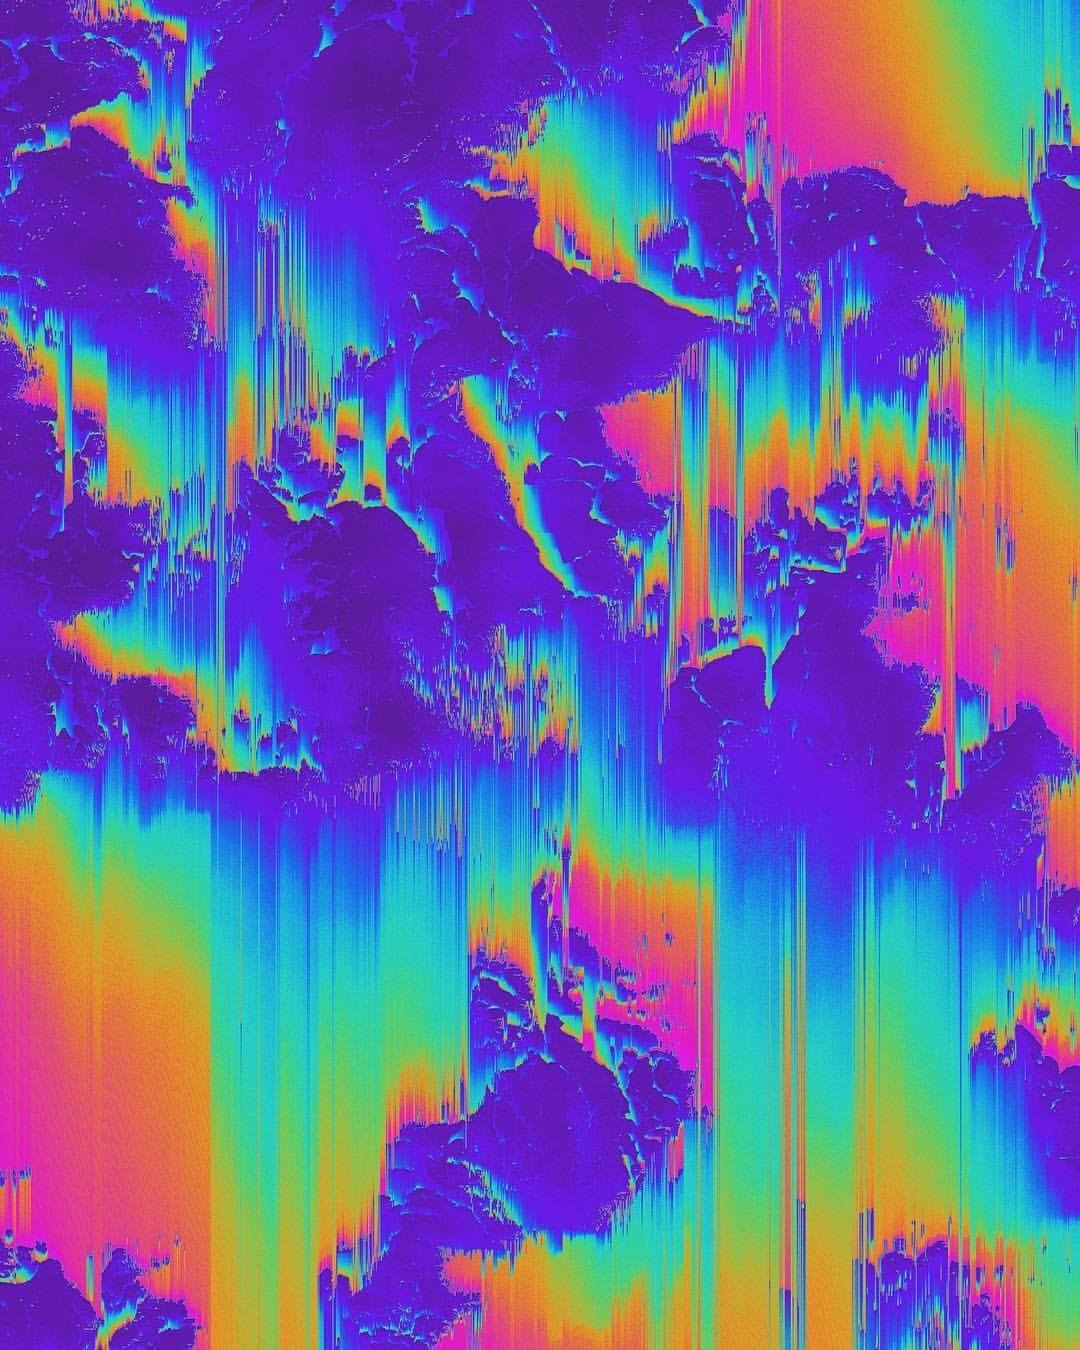 Trippy Aesthetic Purple Wallpapers Wallpaper Cave Multiple sizes available for all screen sizes. trippy aesthetic purple wallpapers